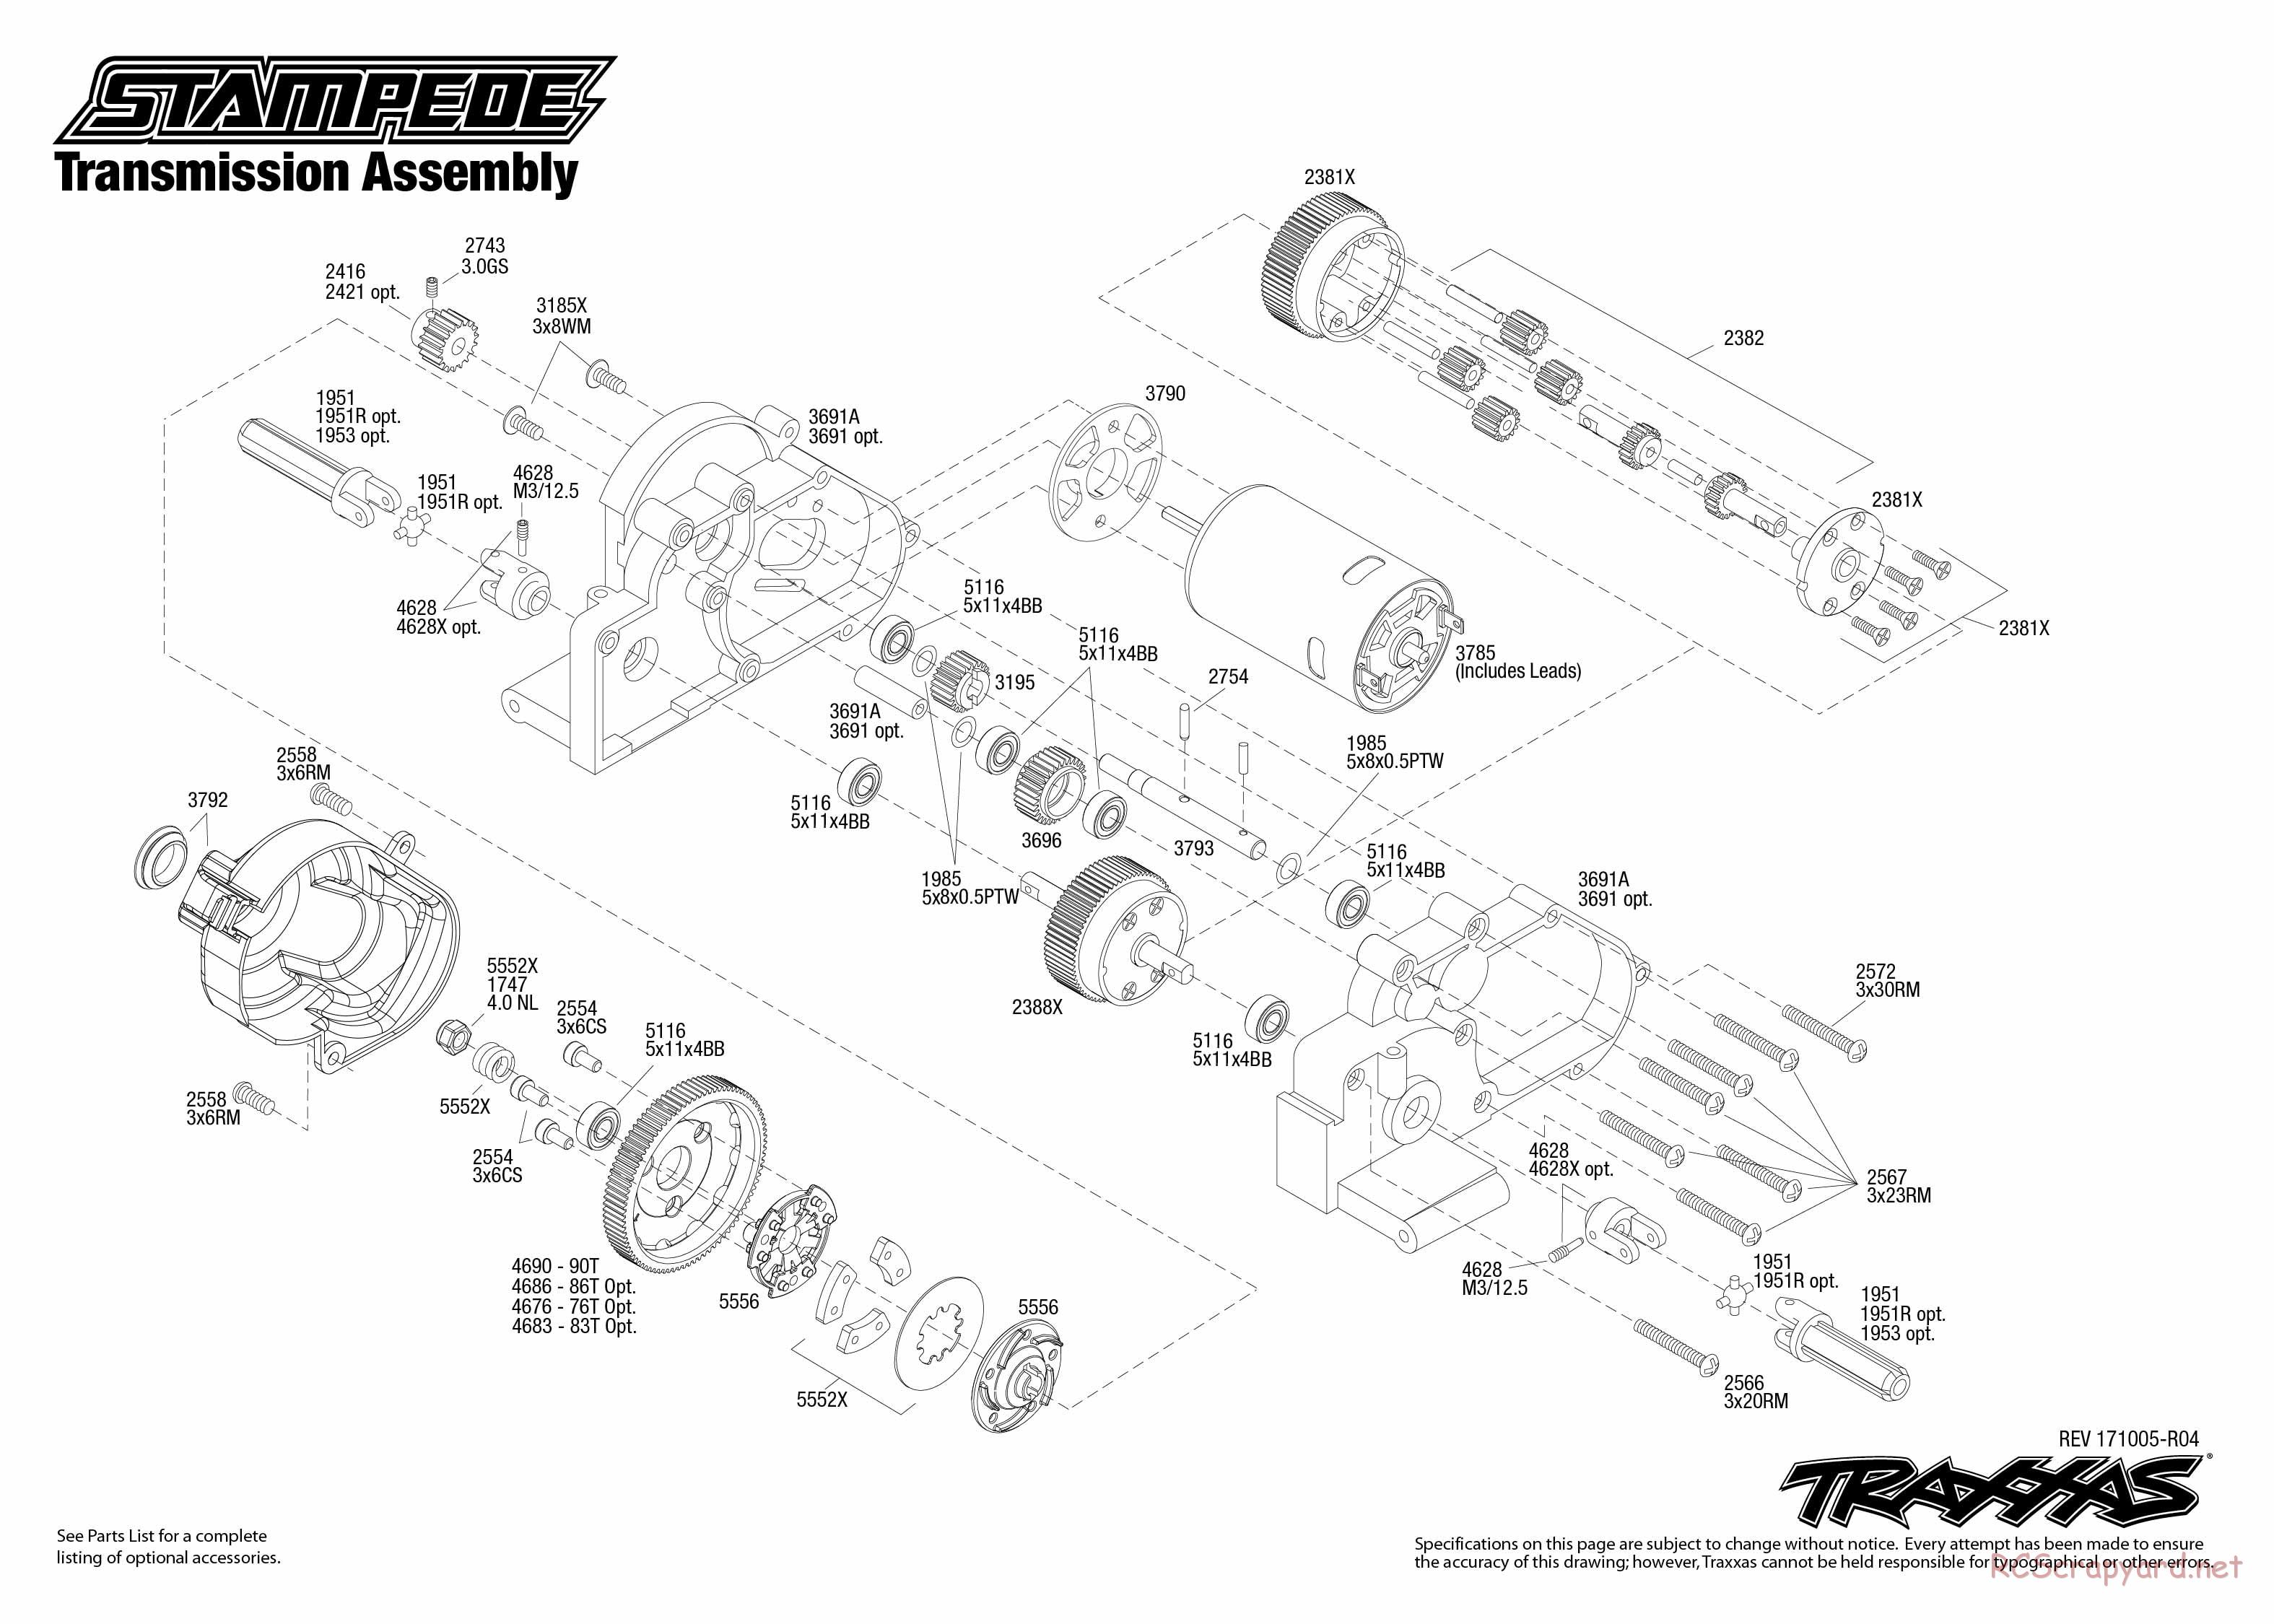 Traxxas - Stampede XL-5 (2018) - Exploded Views - Page 4